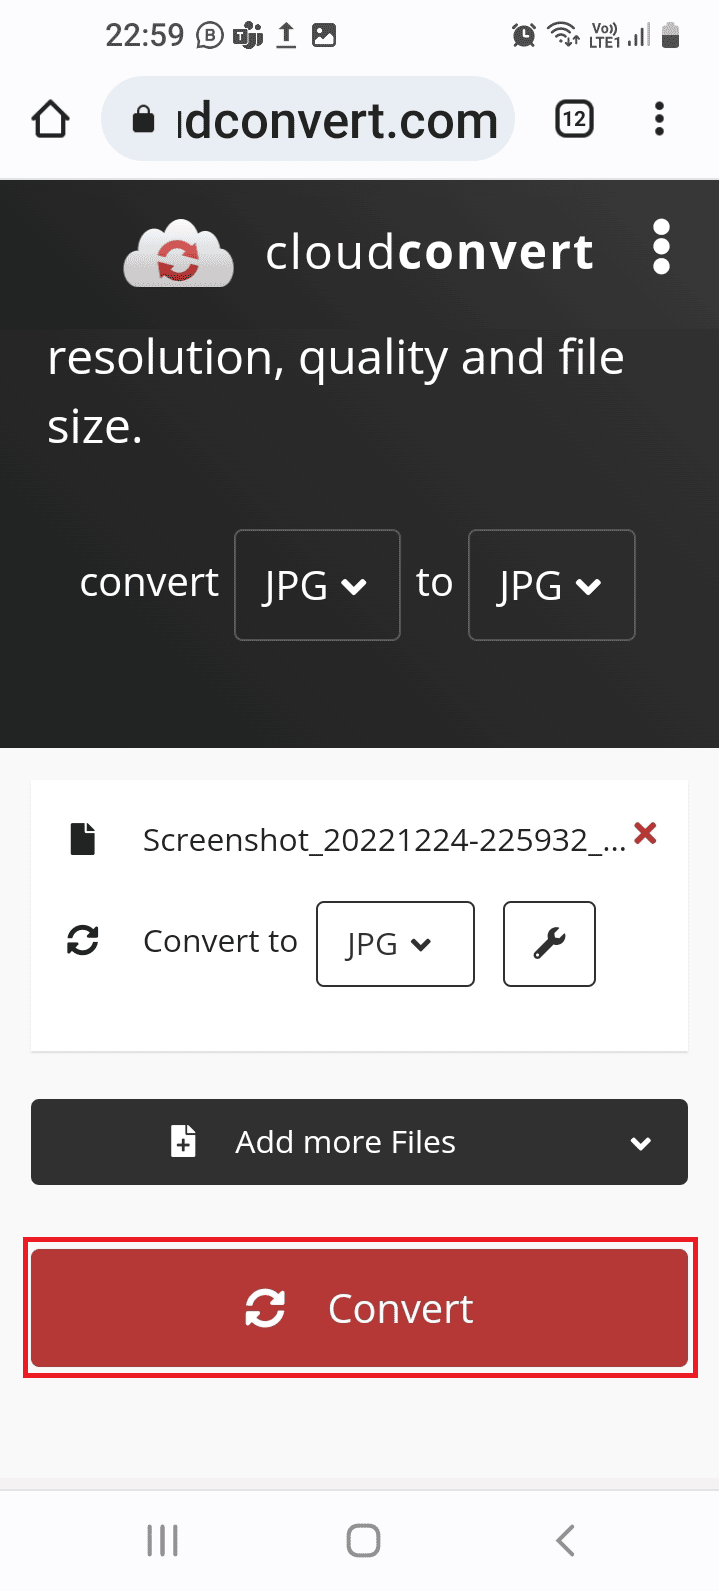 Tap on the Convert button